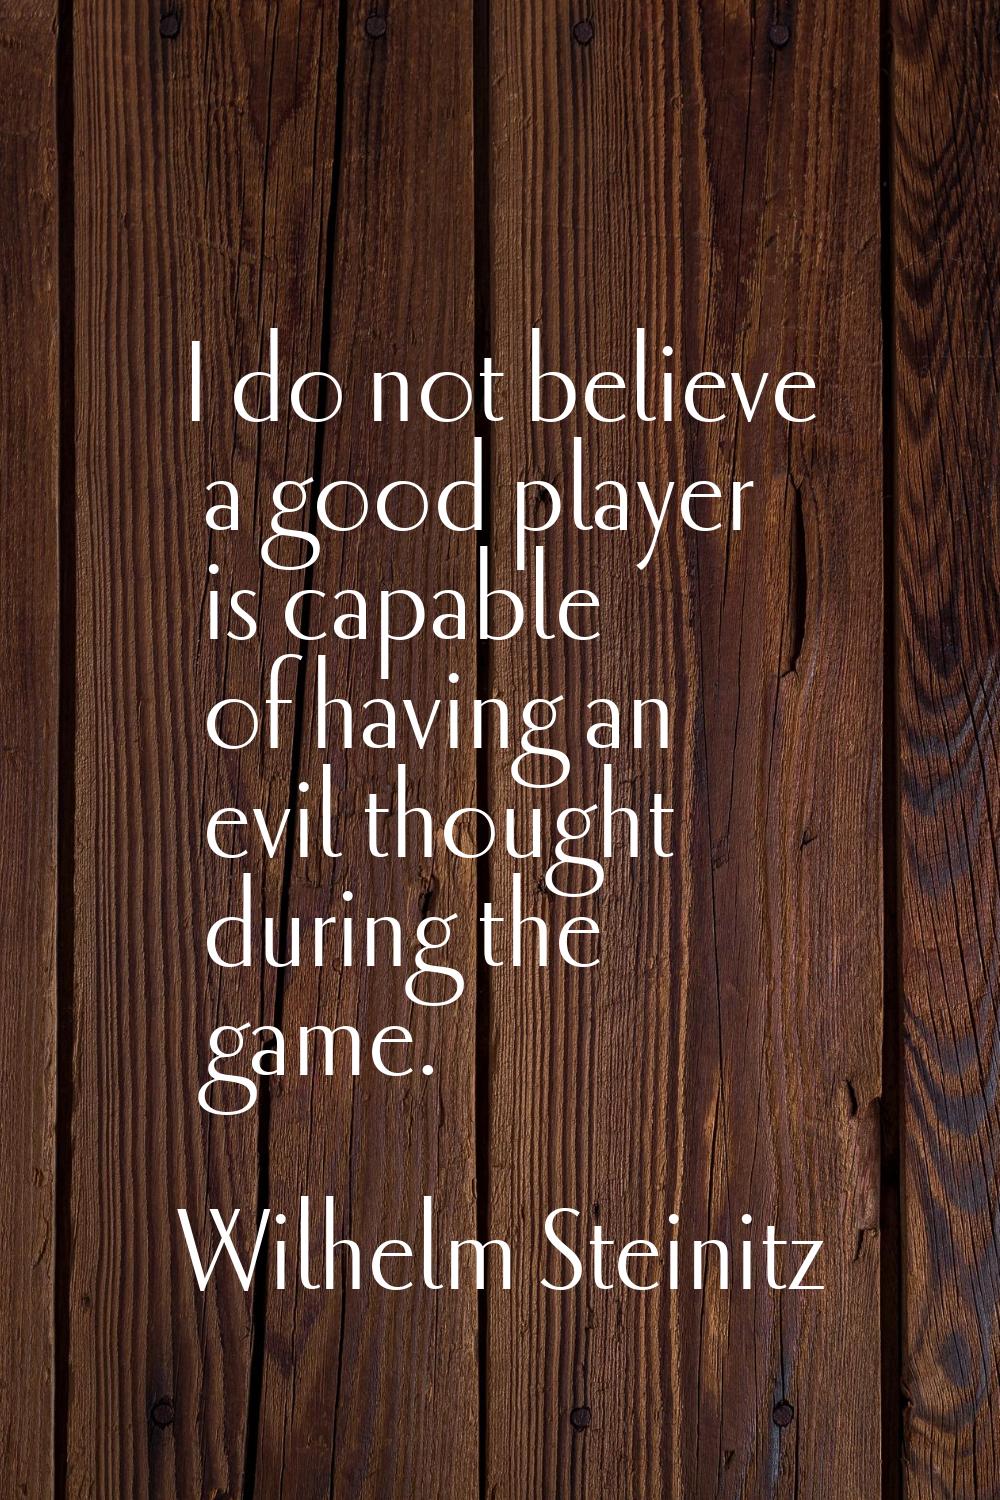 I do not believe a good player is capable of having an evil thought during the game.